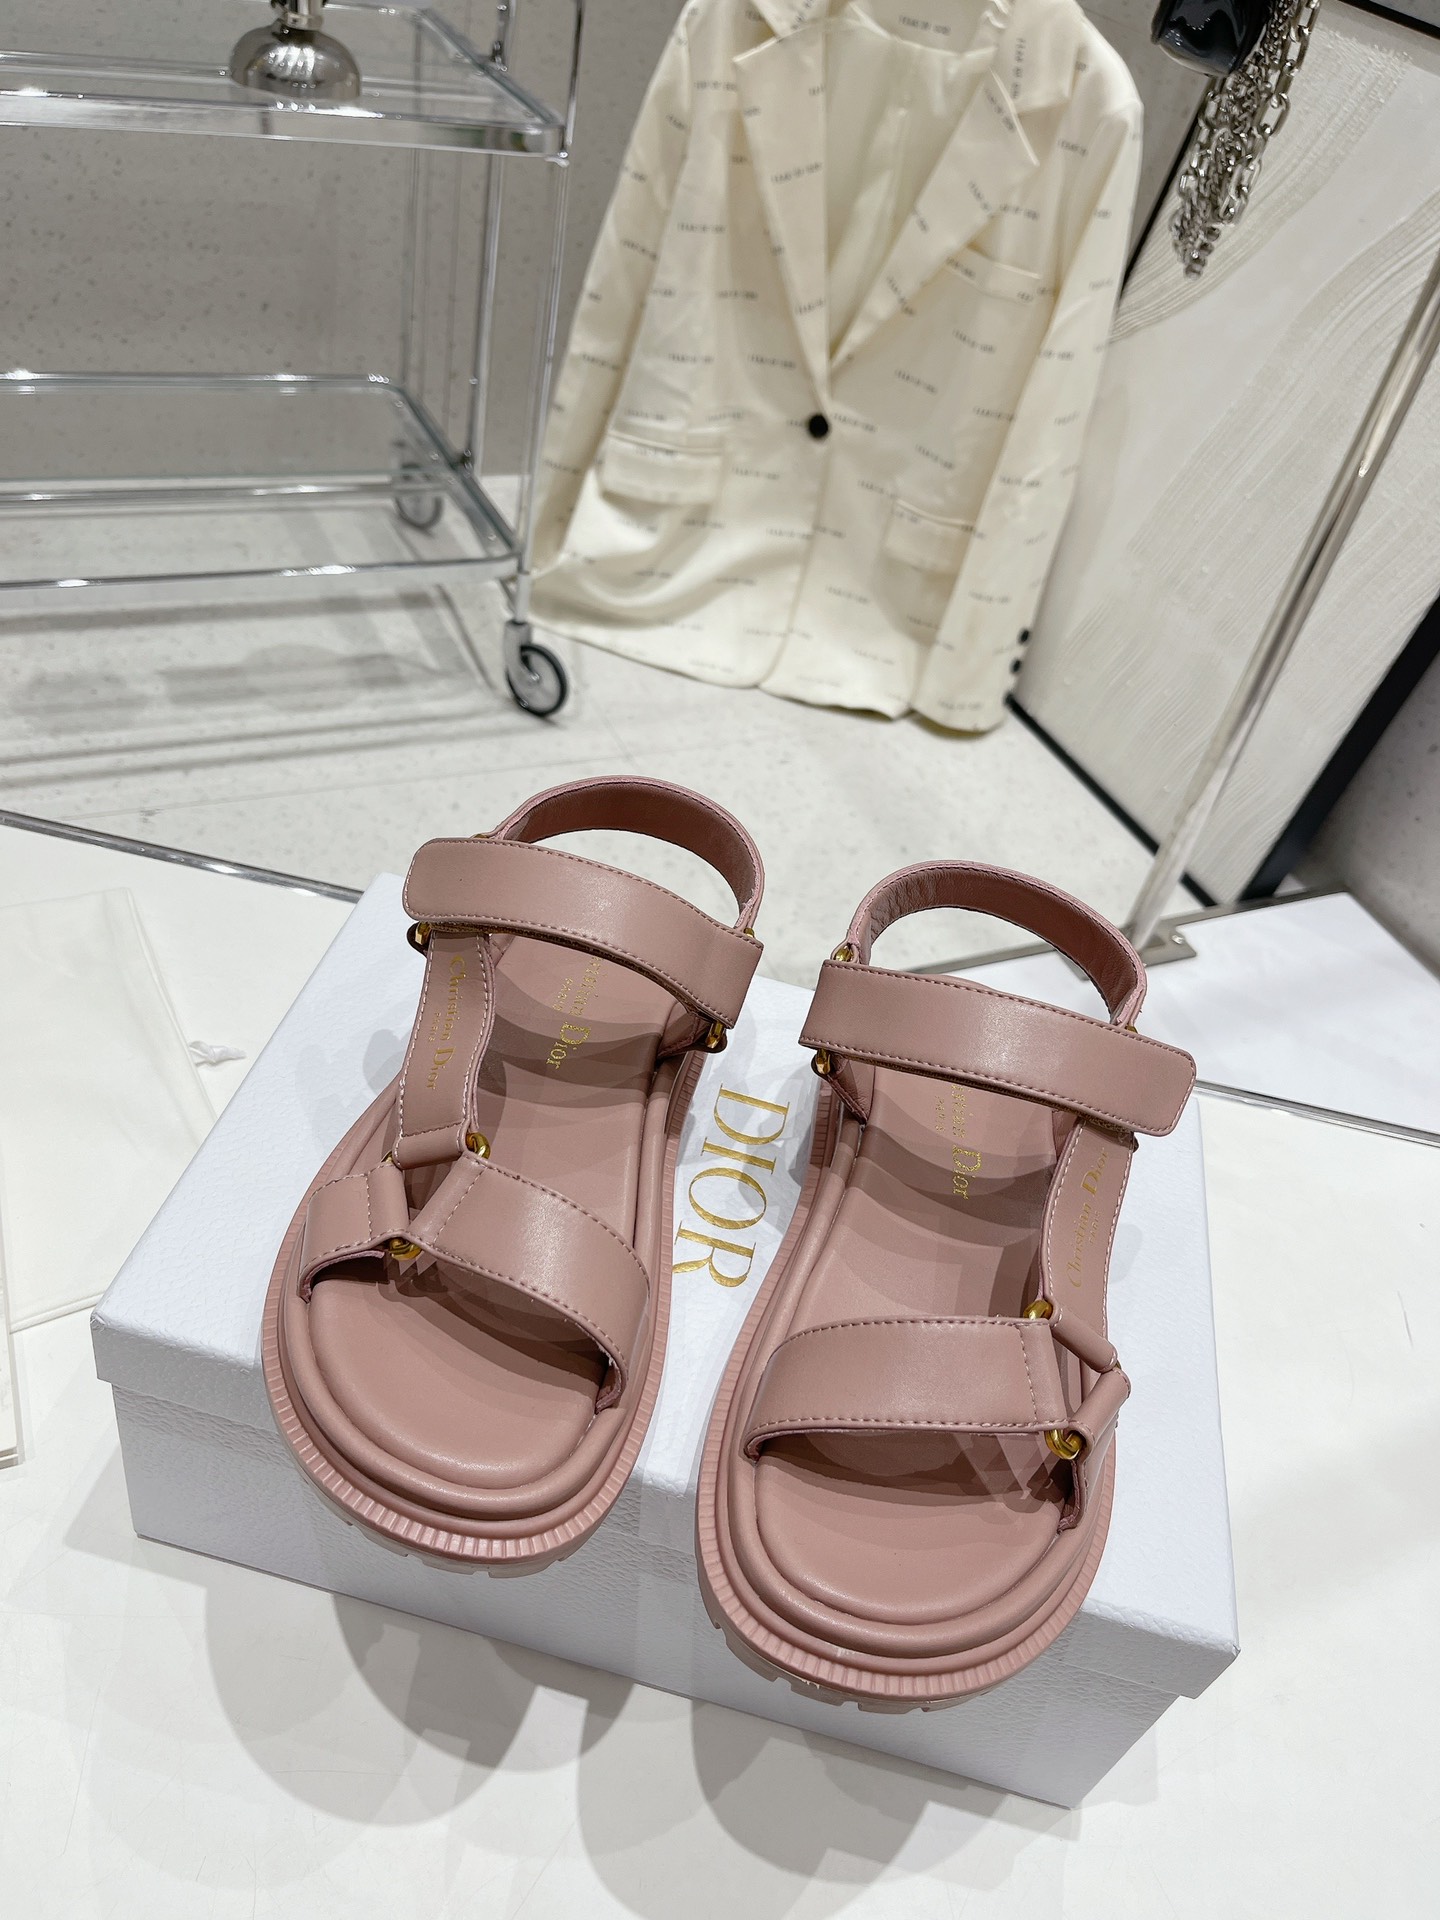 Dior Shoes Sandals Gold Hardware Cowhide TPU Summer Collection